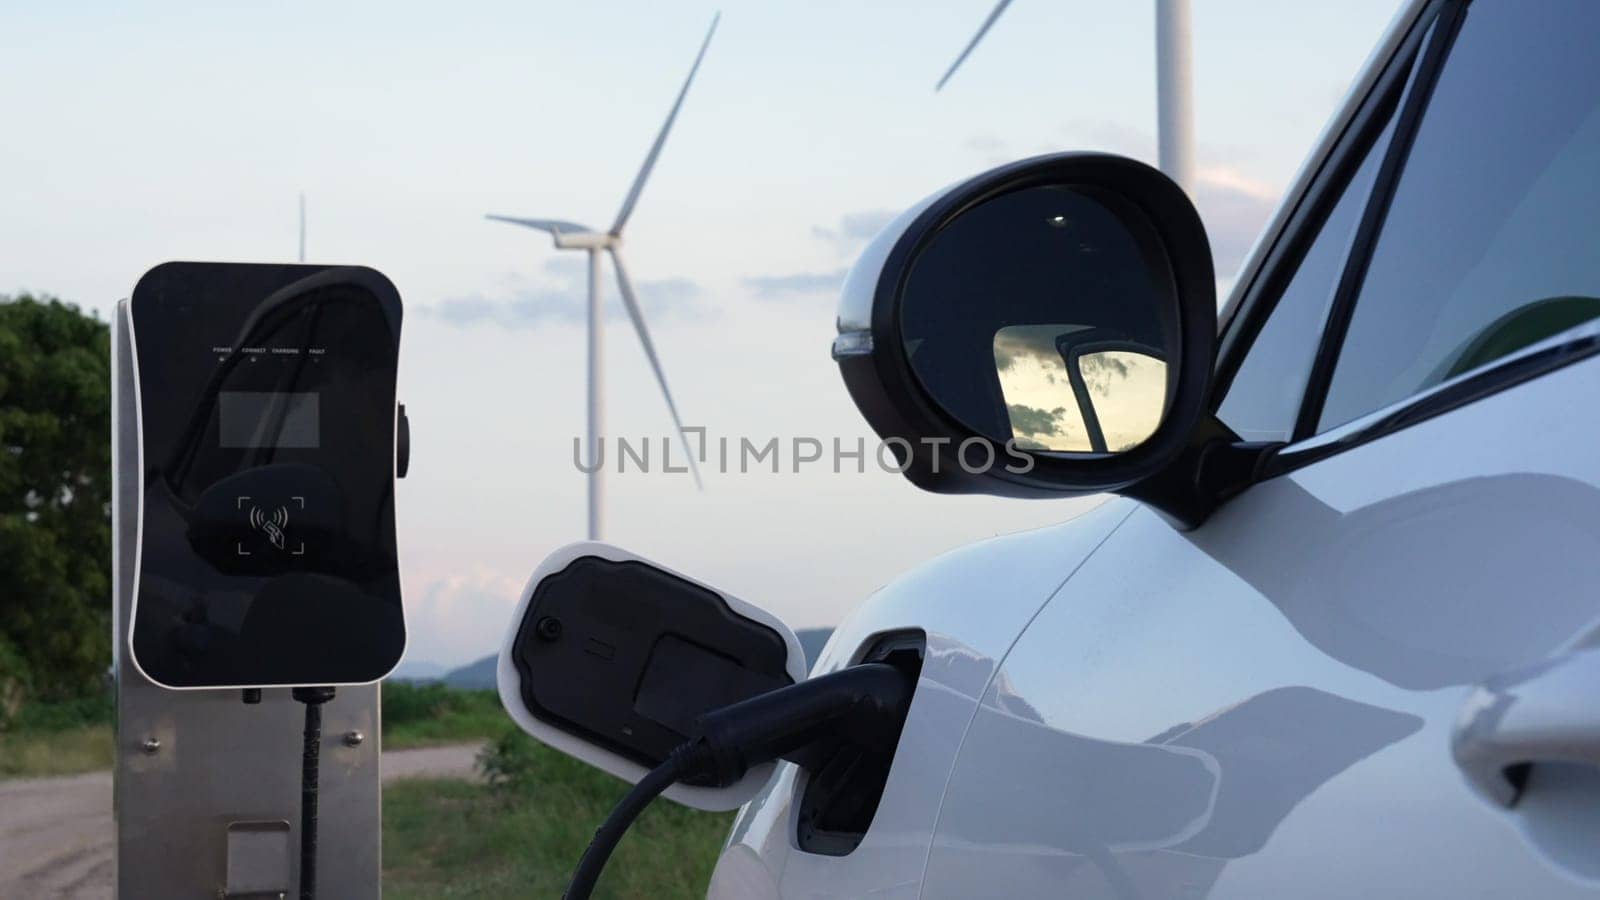 Progressive combination of EV car, charging station and wind turbine. by biancoblue